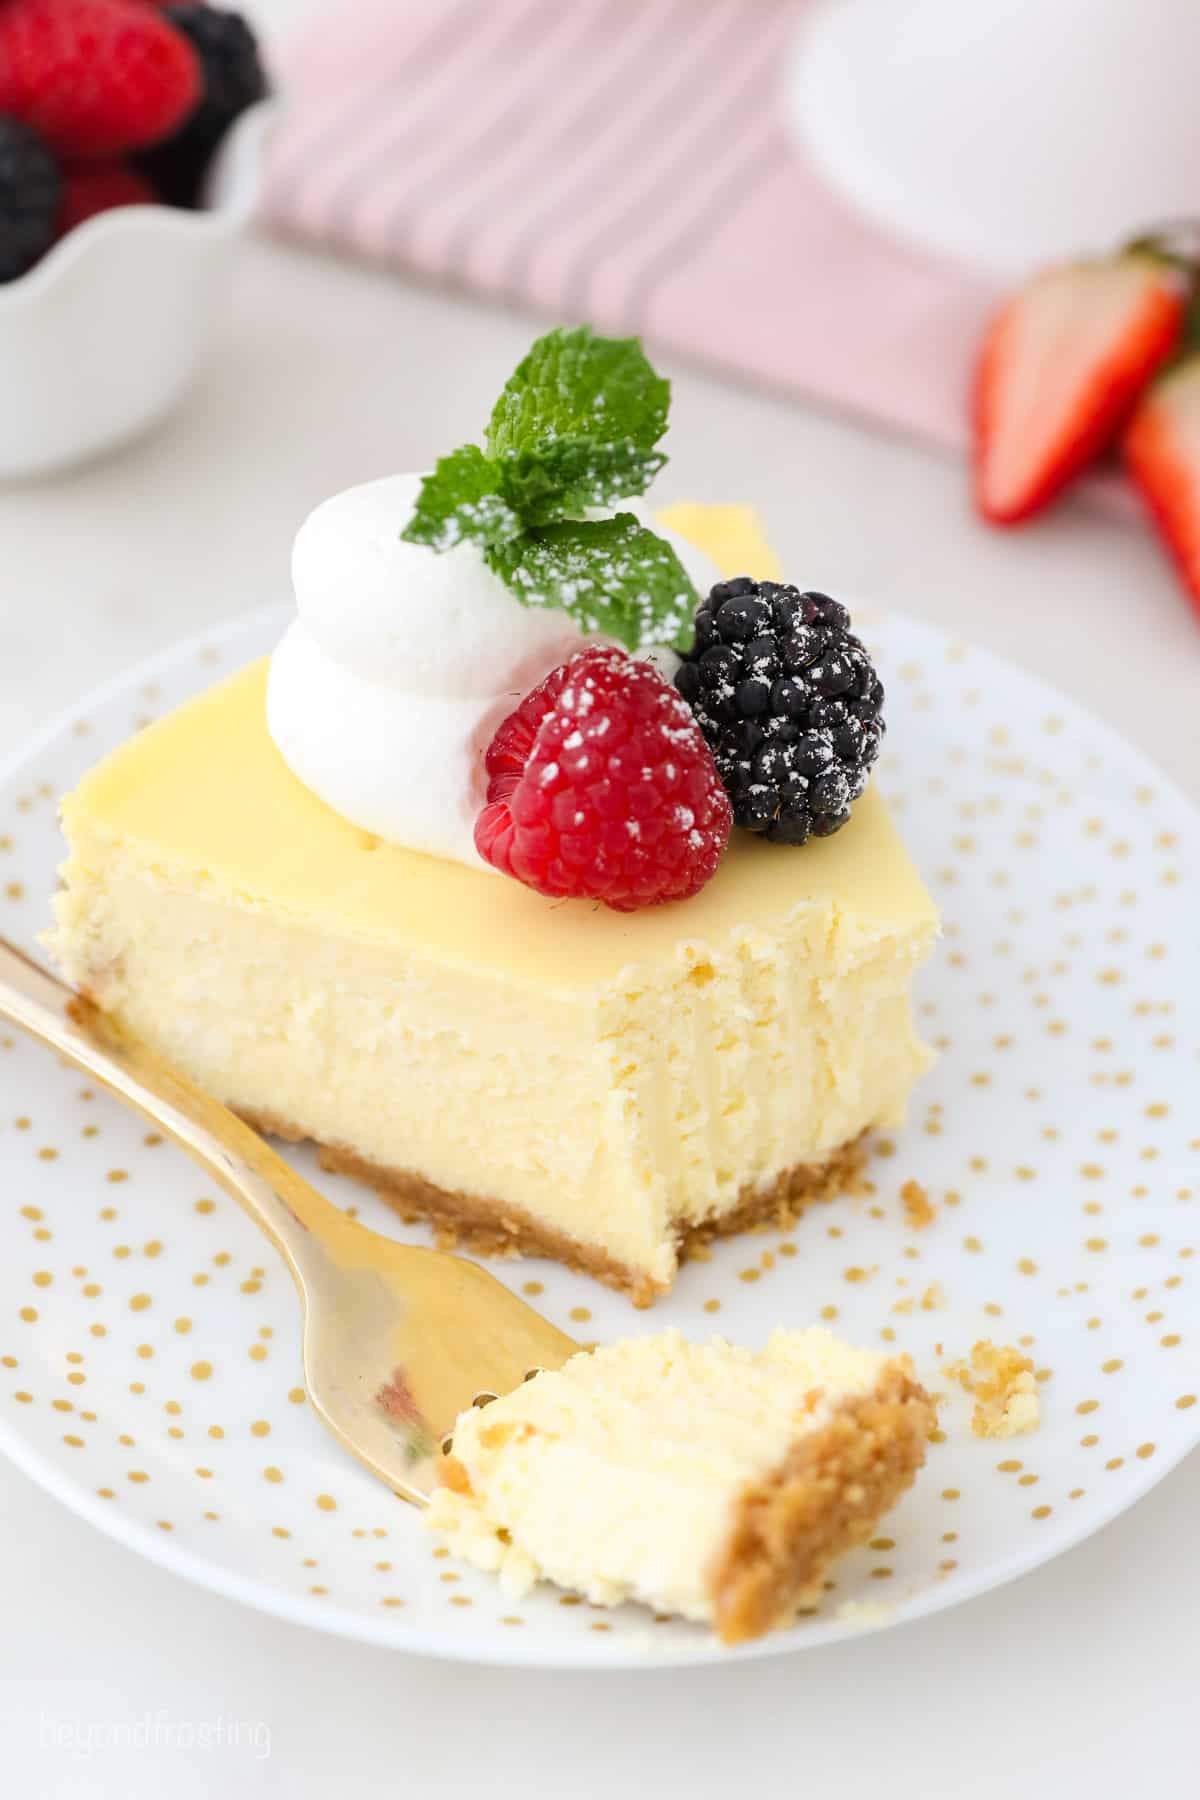 A forkful of cheesecake next to a slice of creamy cheesecake garnished with fresh berries and a swirl of whipped cream on a white plate.